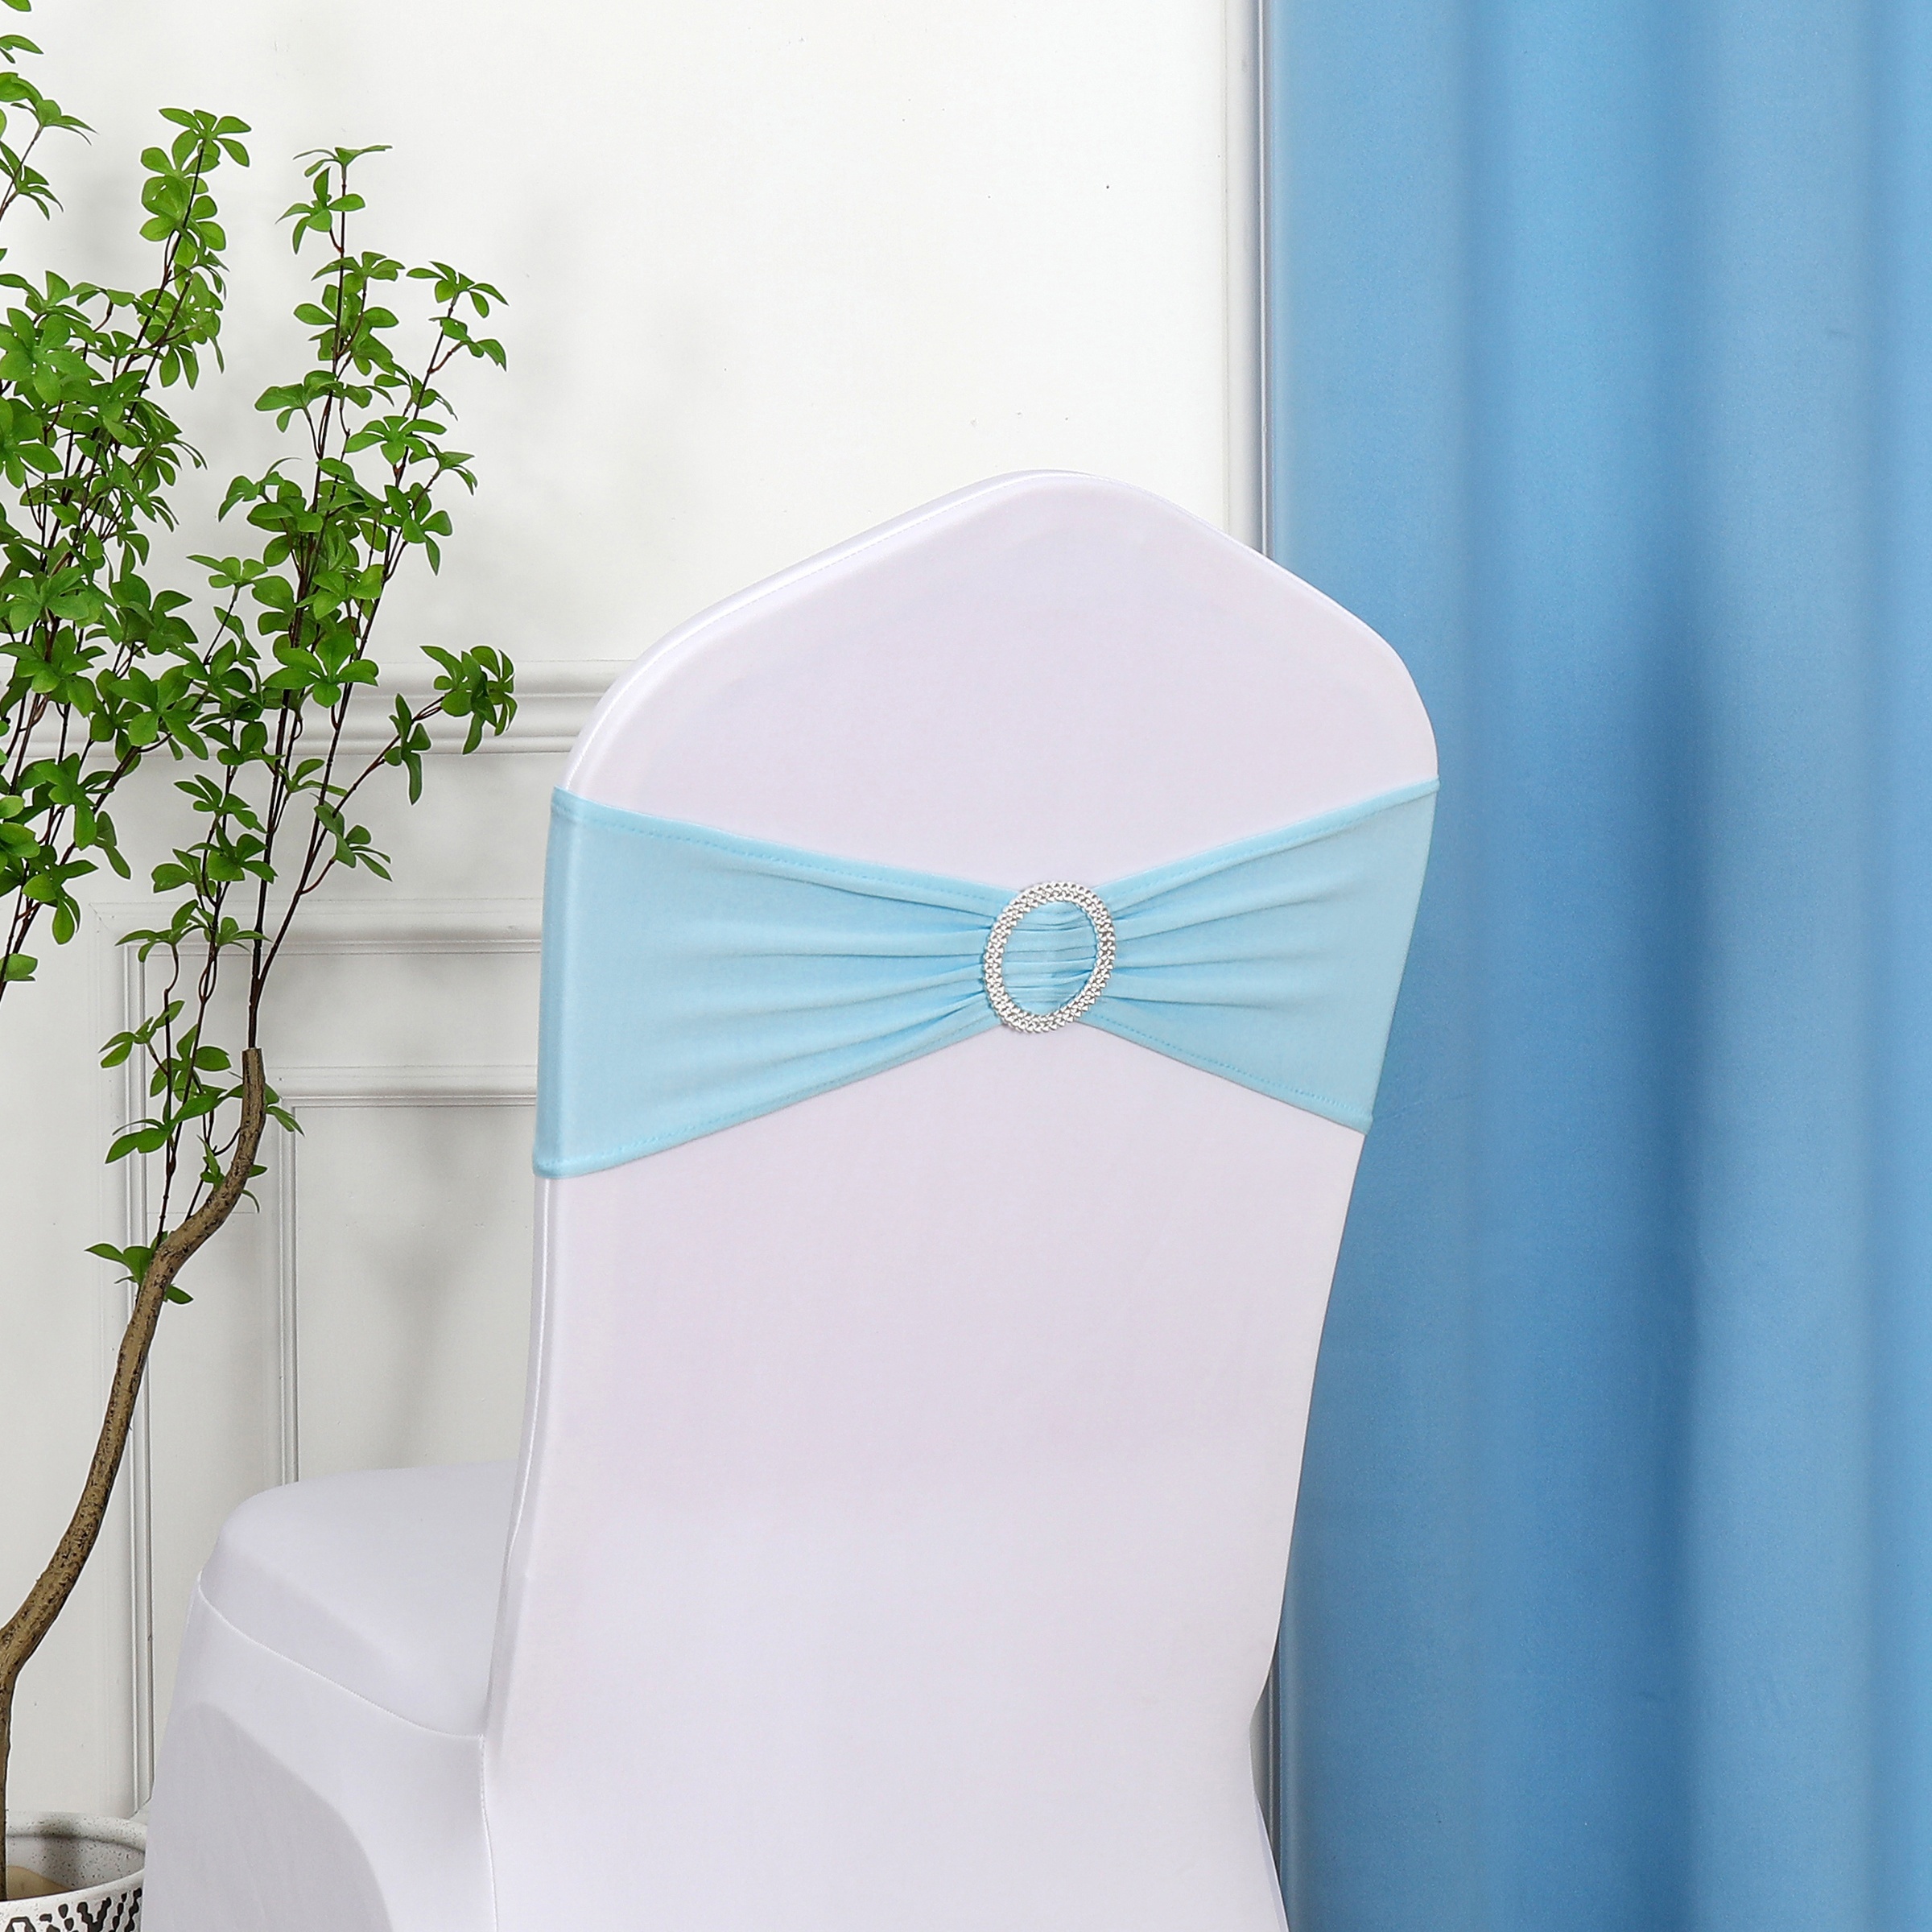 

20pcs Spandex Chair Sashes With Bowknot Universal Elastic Chair Ties For Wedding Party Ceremony Reception Banquet Decoration (sky Blue)